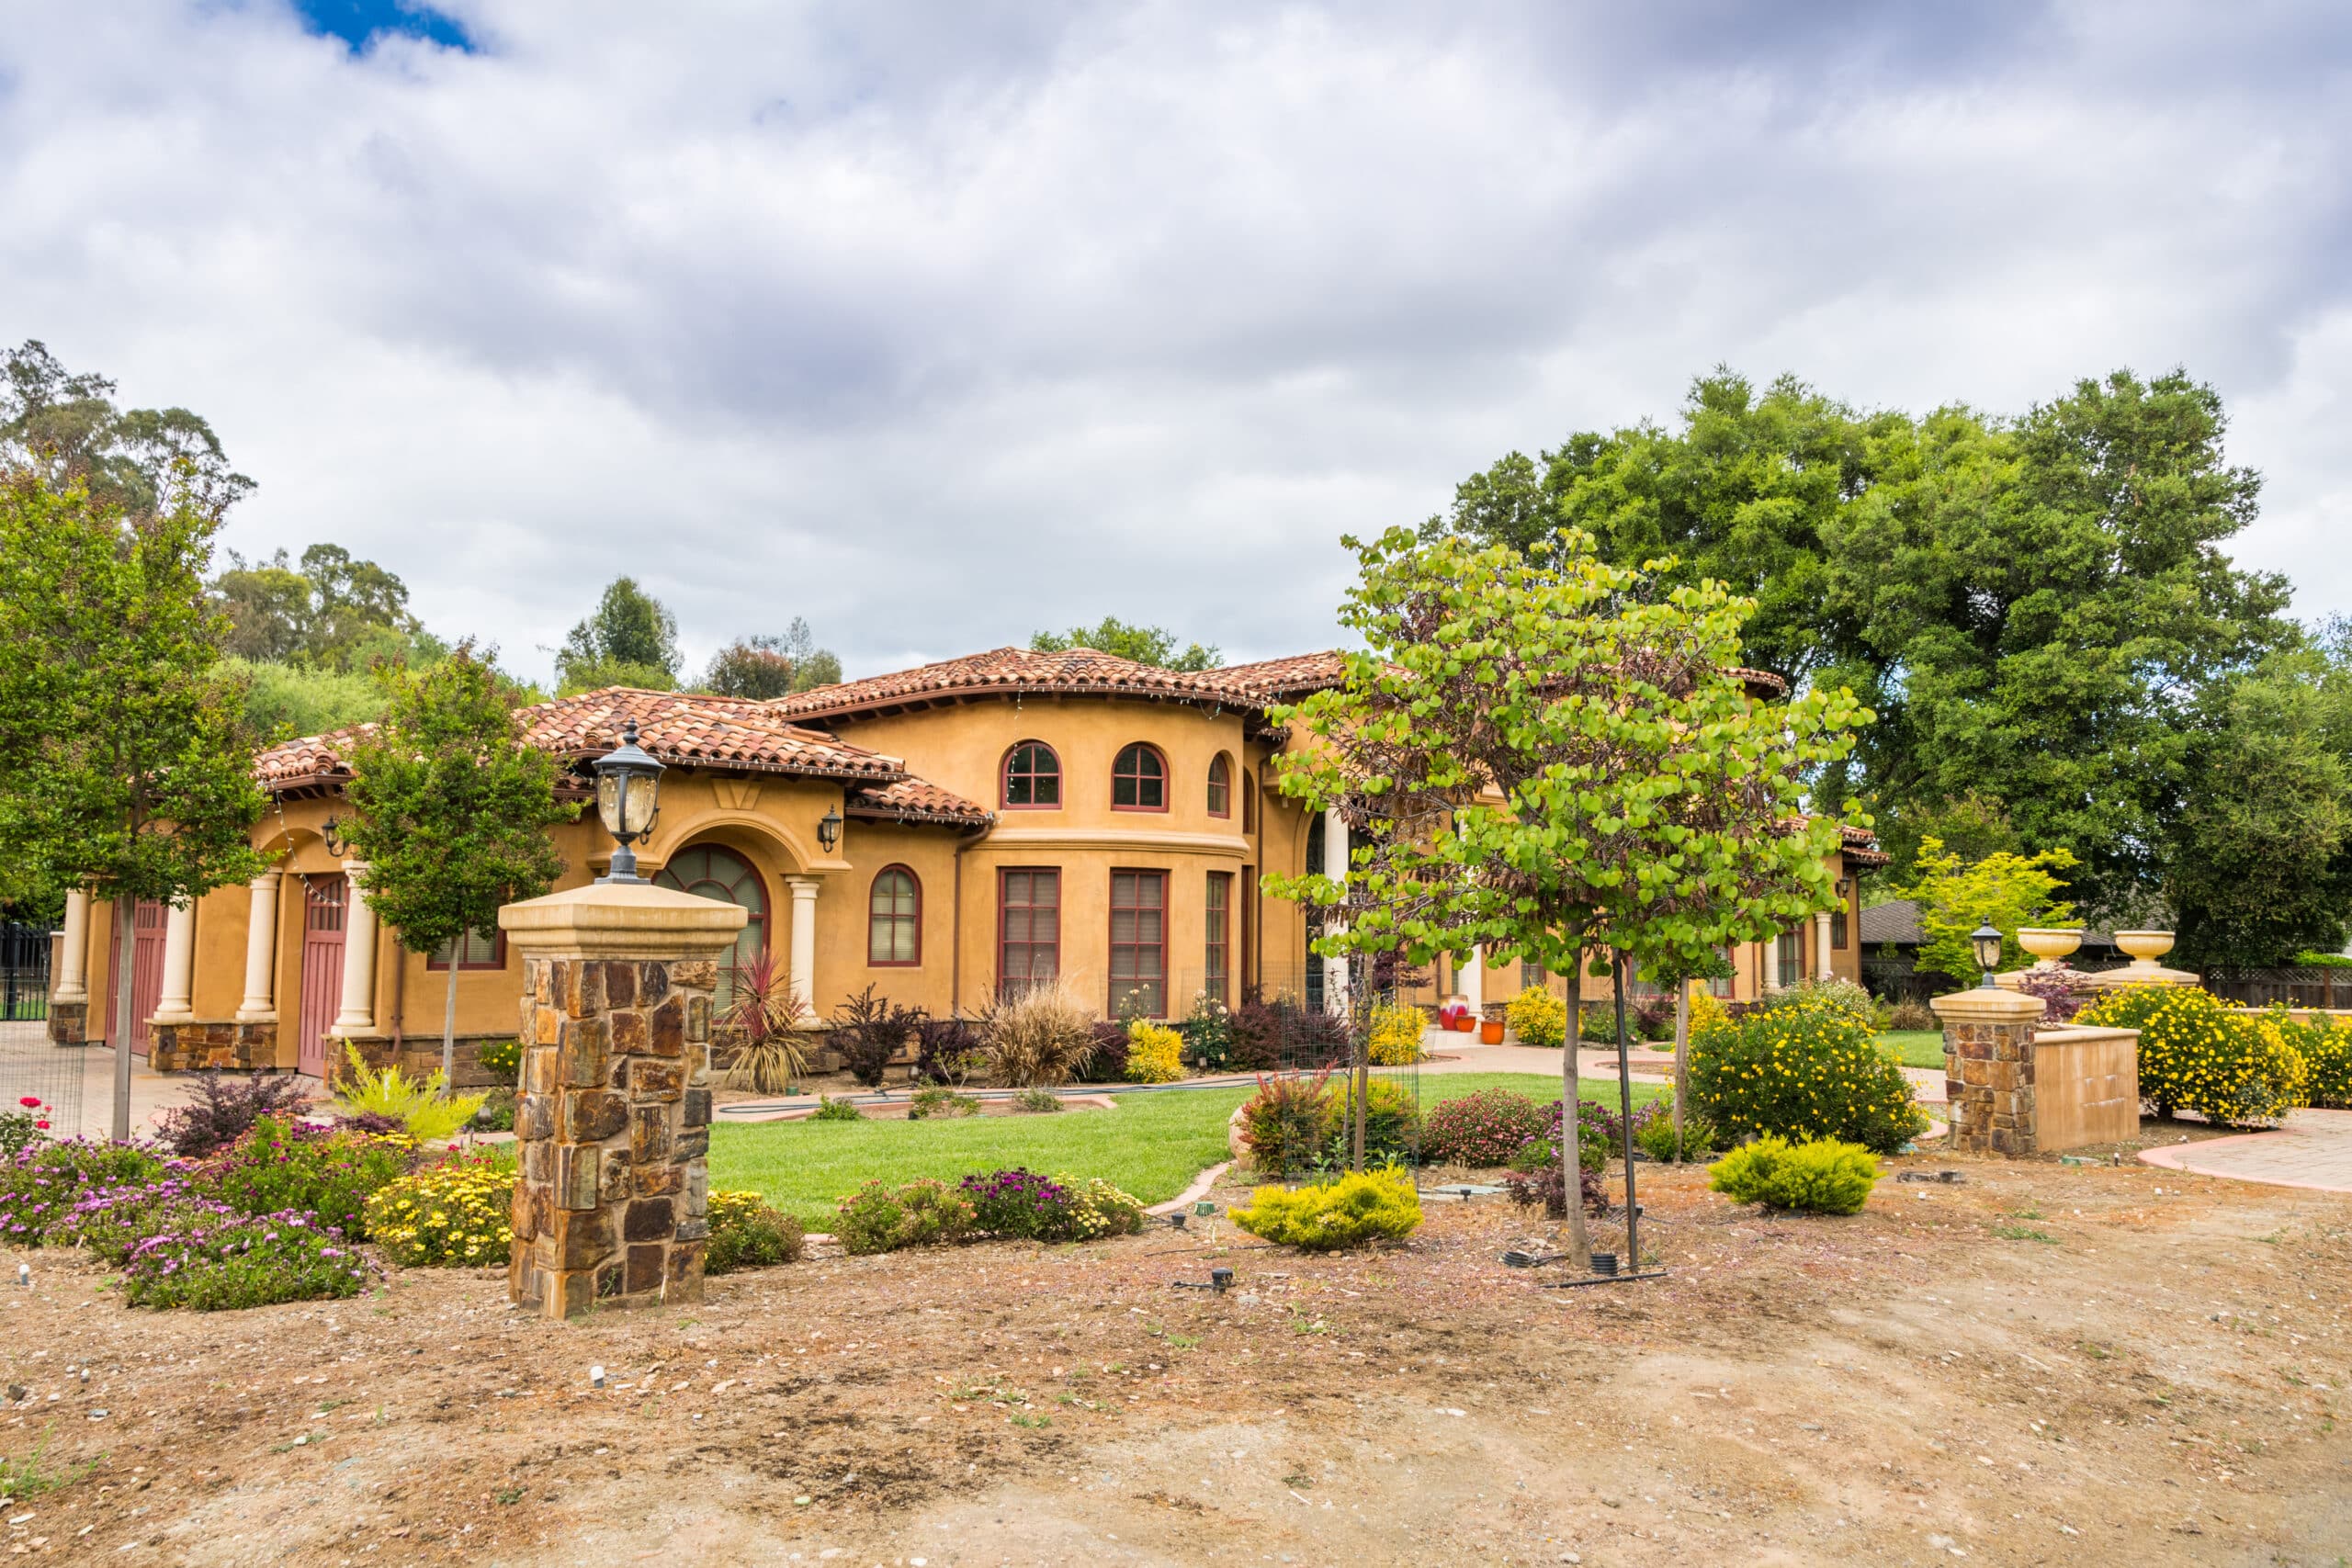 Luxurious Mediterranean-style villa with landscaped gardens under a cloudy sky in Saratoga